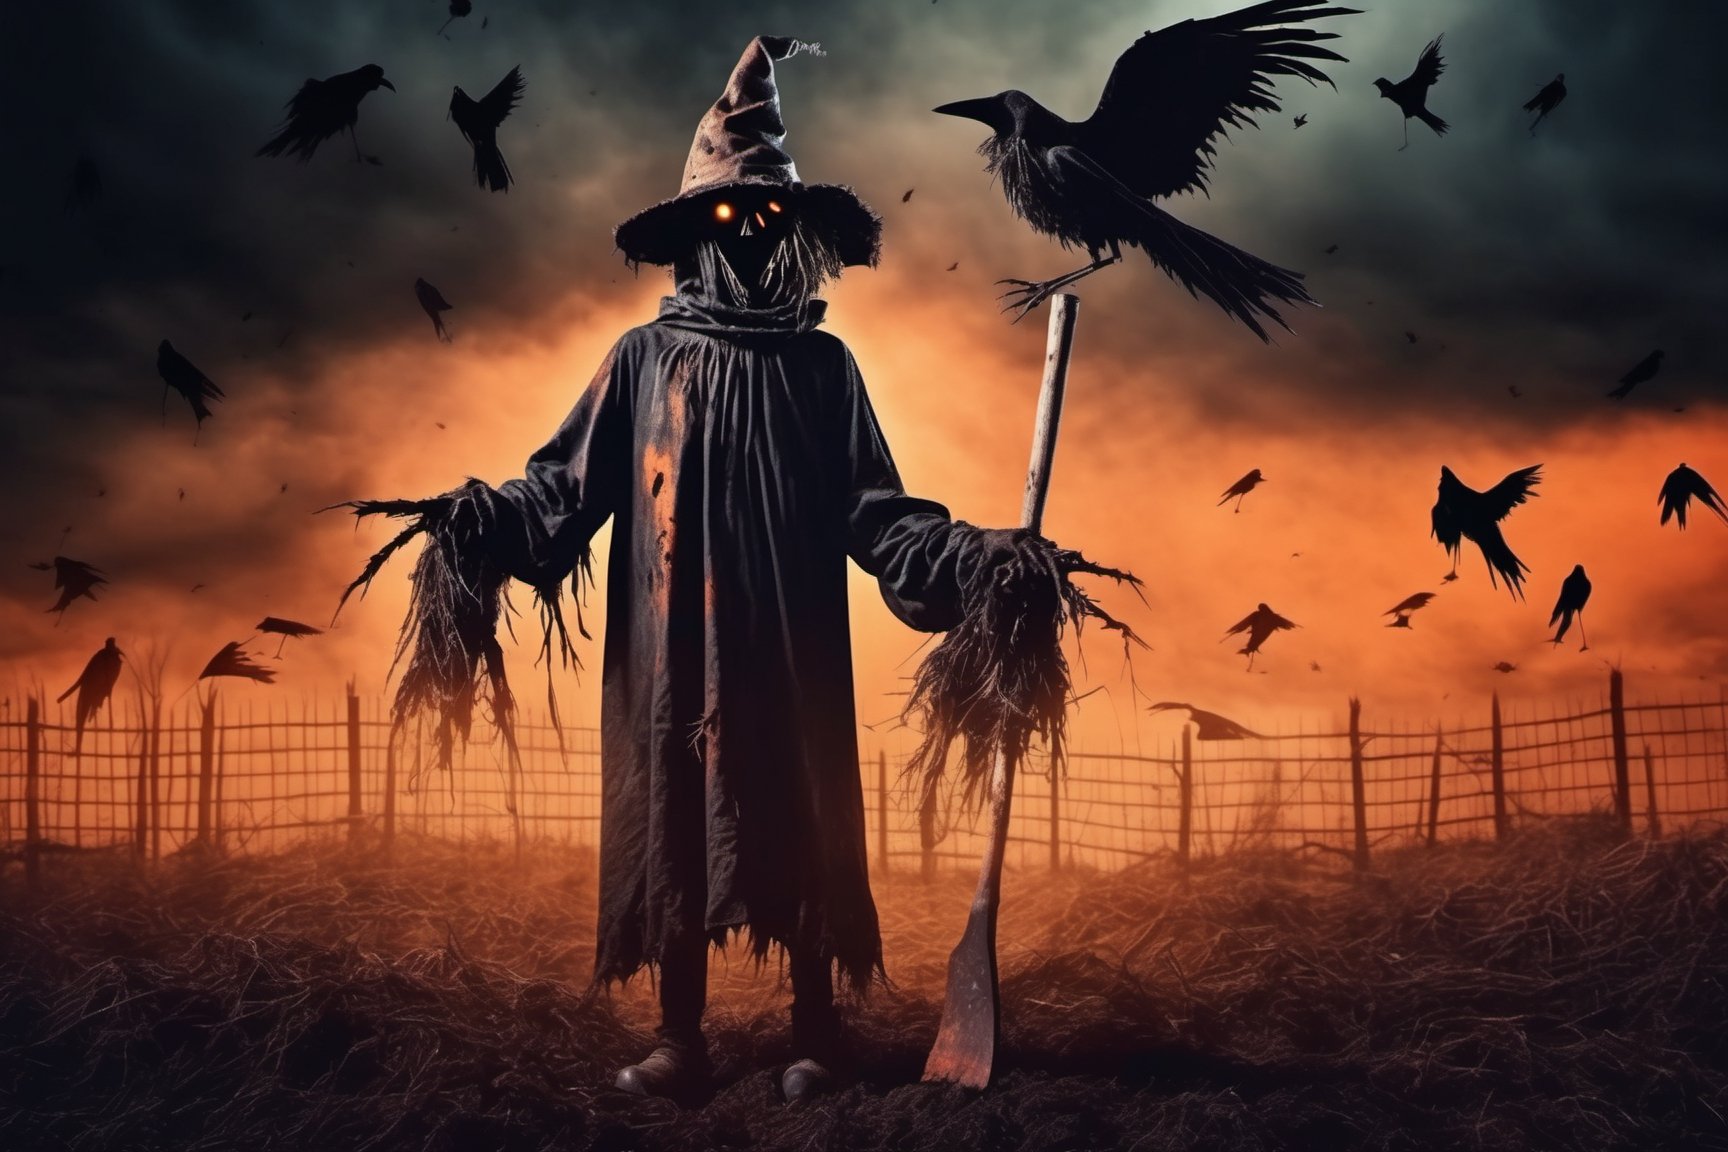 creepy full body scarecrow realistic with hatchet in hand at night foreboding background HD, flock of flying crows, corpses coming out of the ground, tenebrism, strange, multi tonal orange and black gradient tumultuous sky, dark core, moderately controlled chaos, ghost core, Nicolas Samori